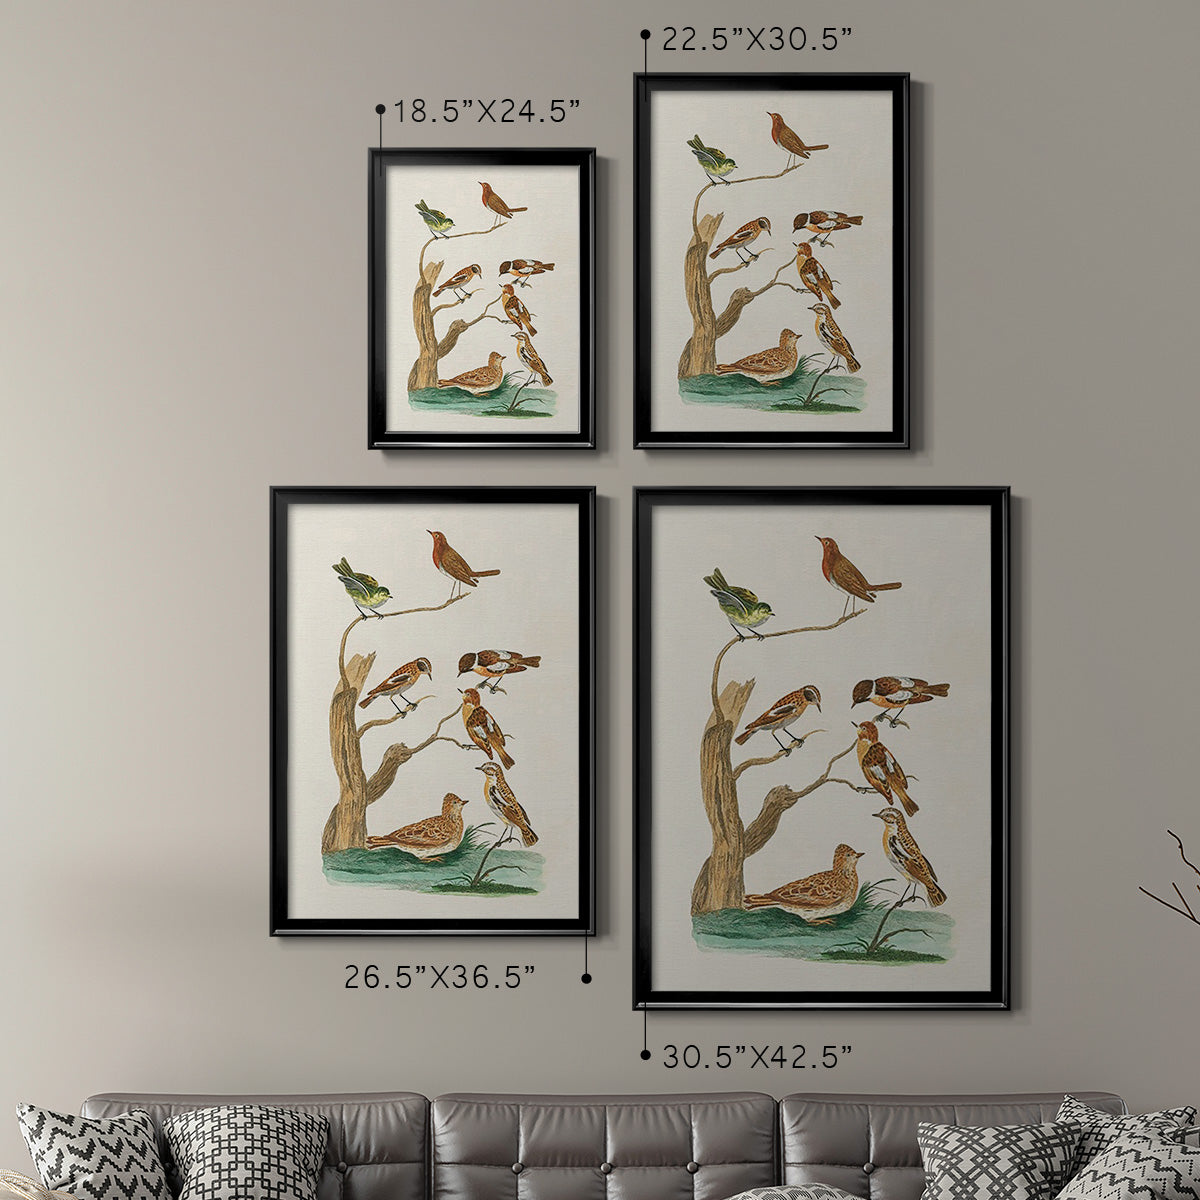 Antique Birds in Nature III Premium Framed Print - Ready to Hang